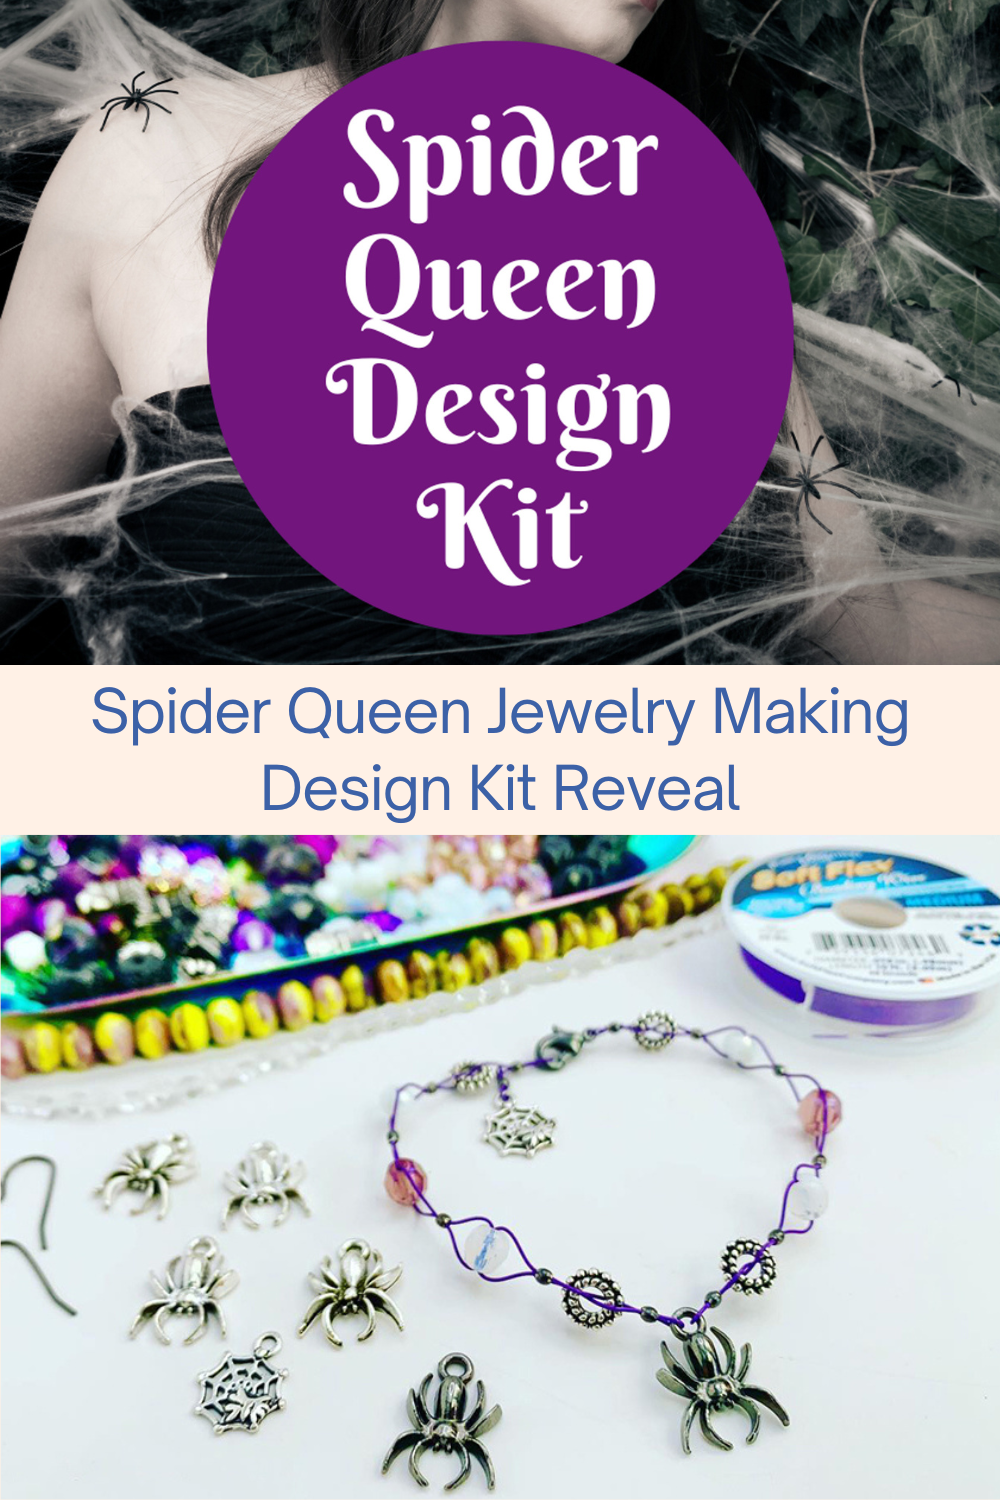 Spider Queen Jewelry Making Design Kit Reveal Collage